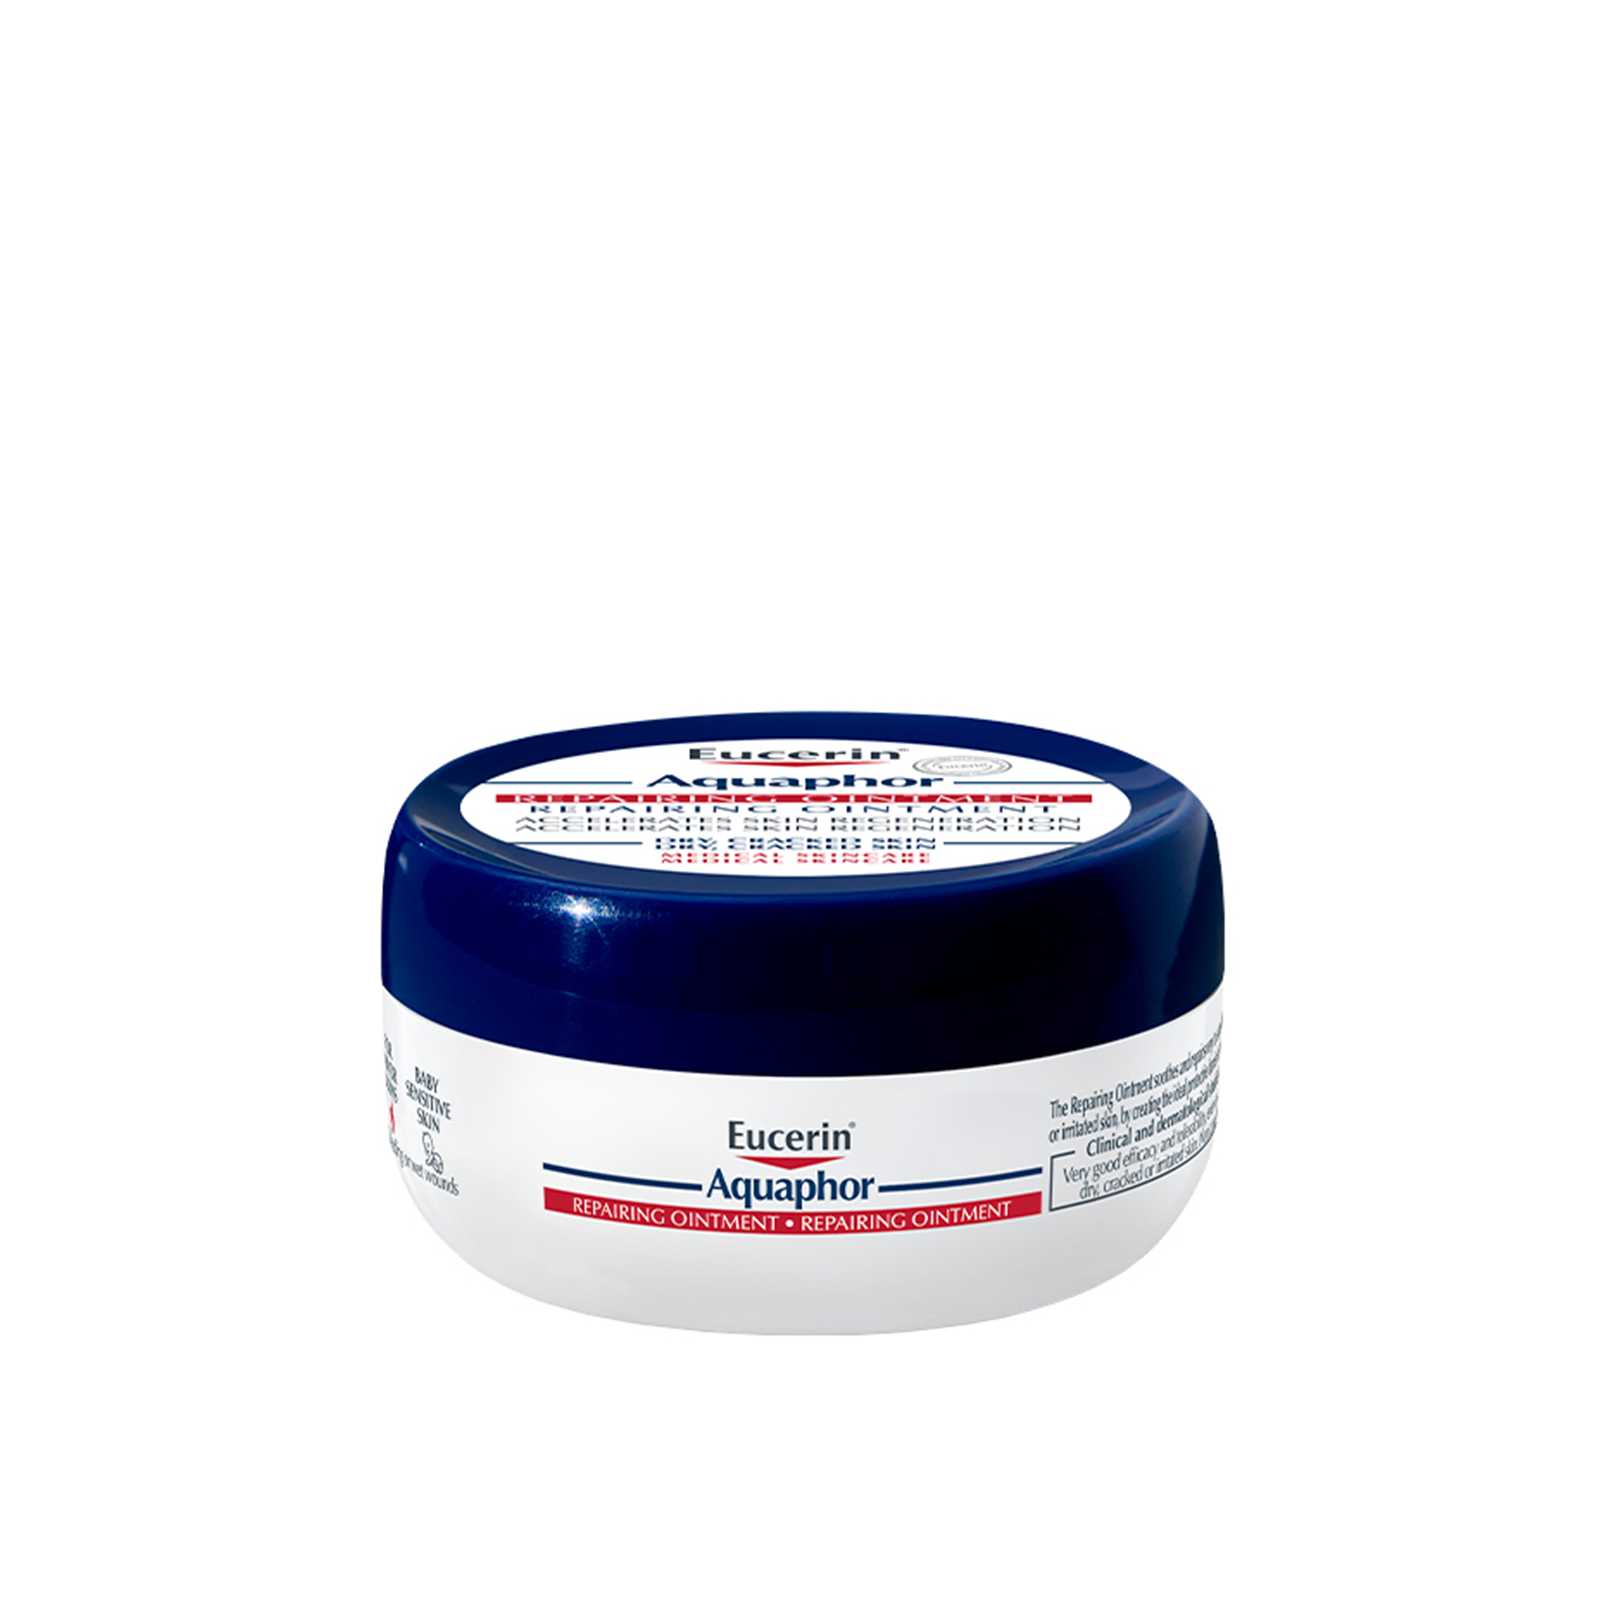 Best Eucerin Products: Eucerin Aquaphor Repairing Ointment 80g
